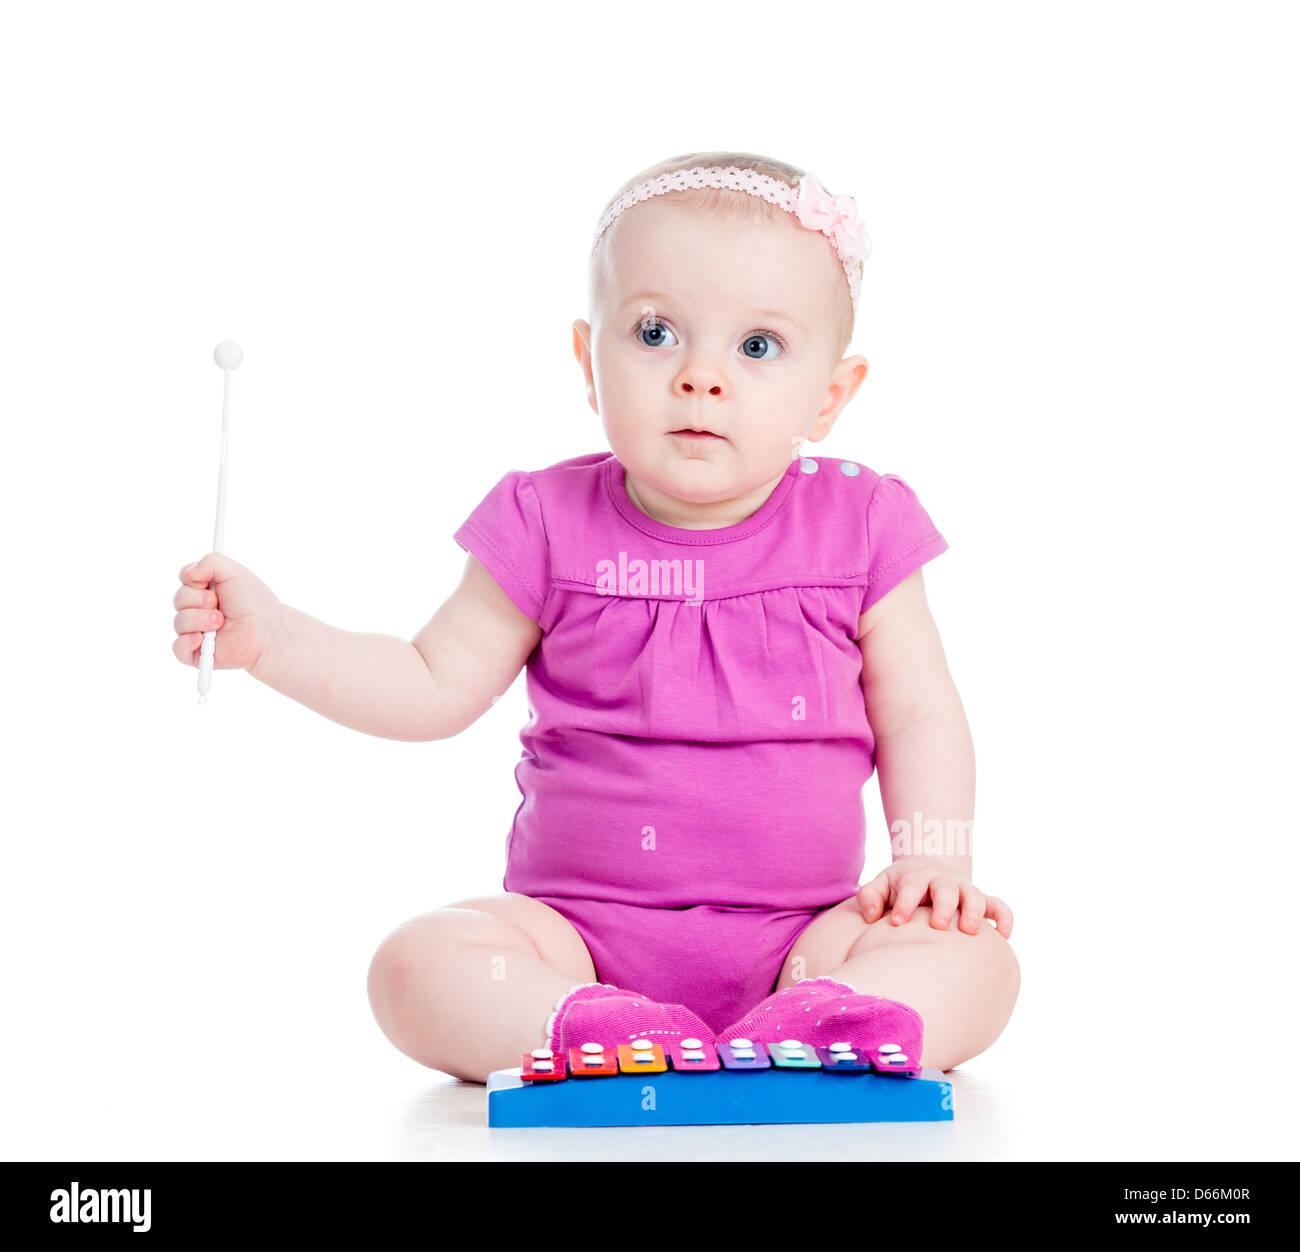 girl baby playing musical toy Stock Photo